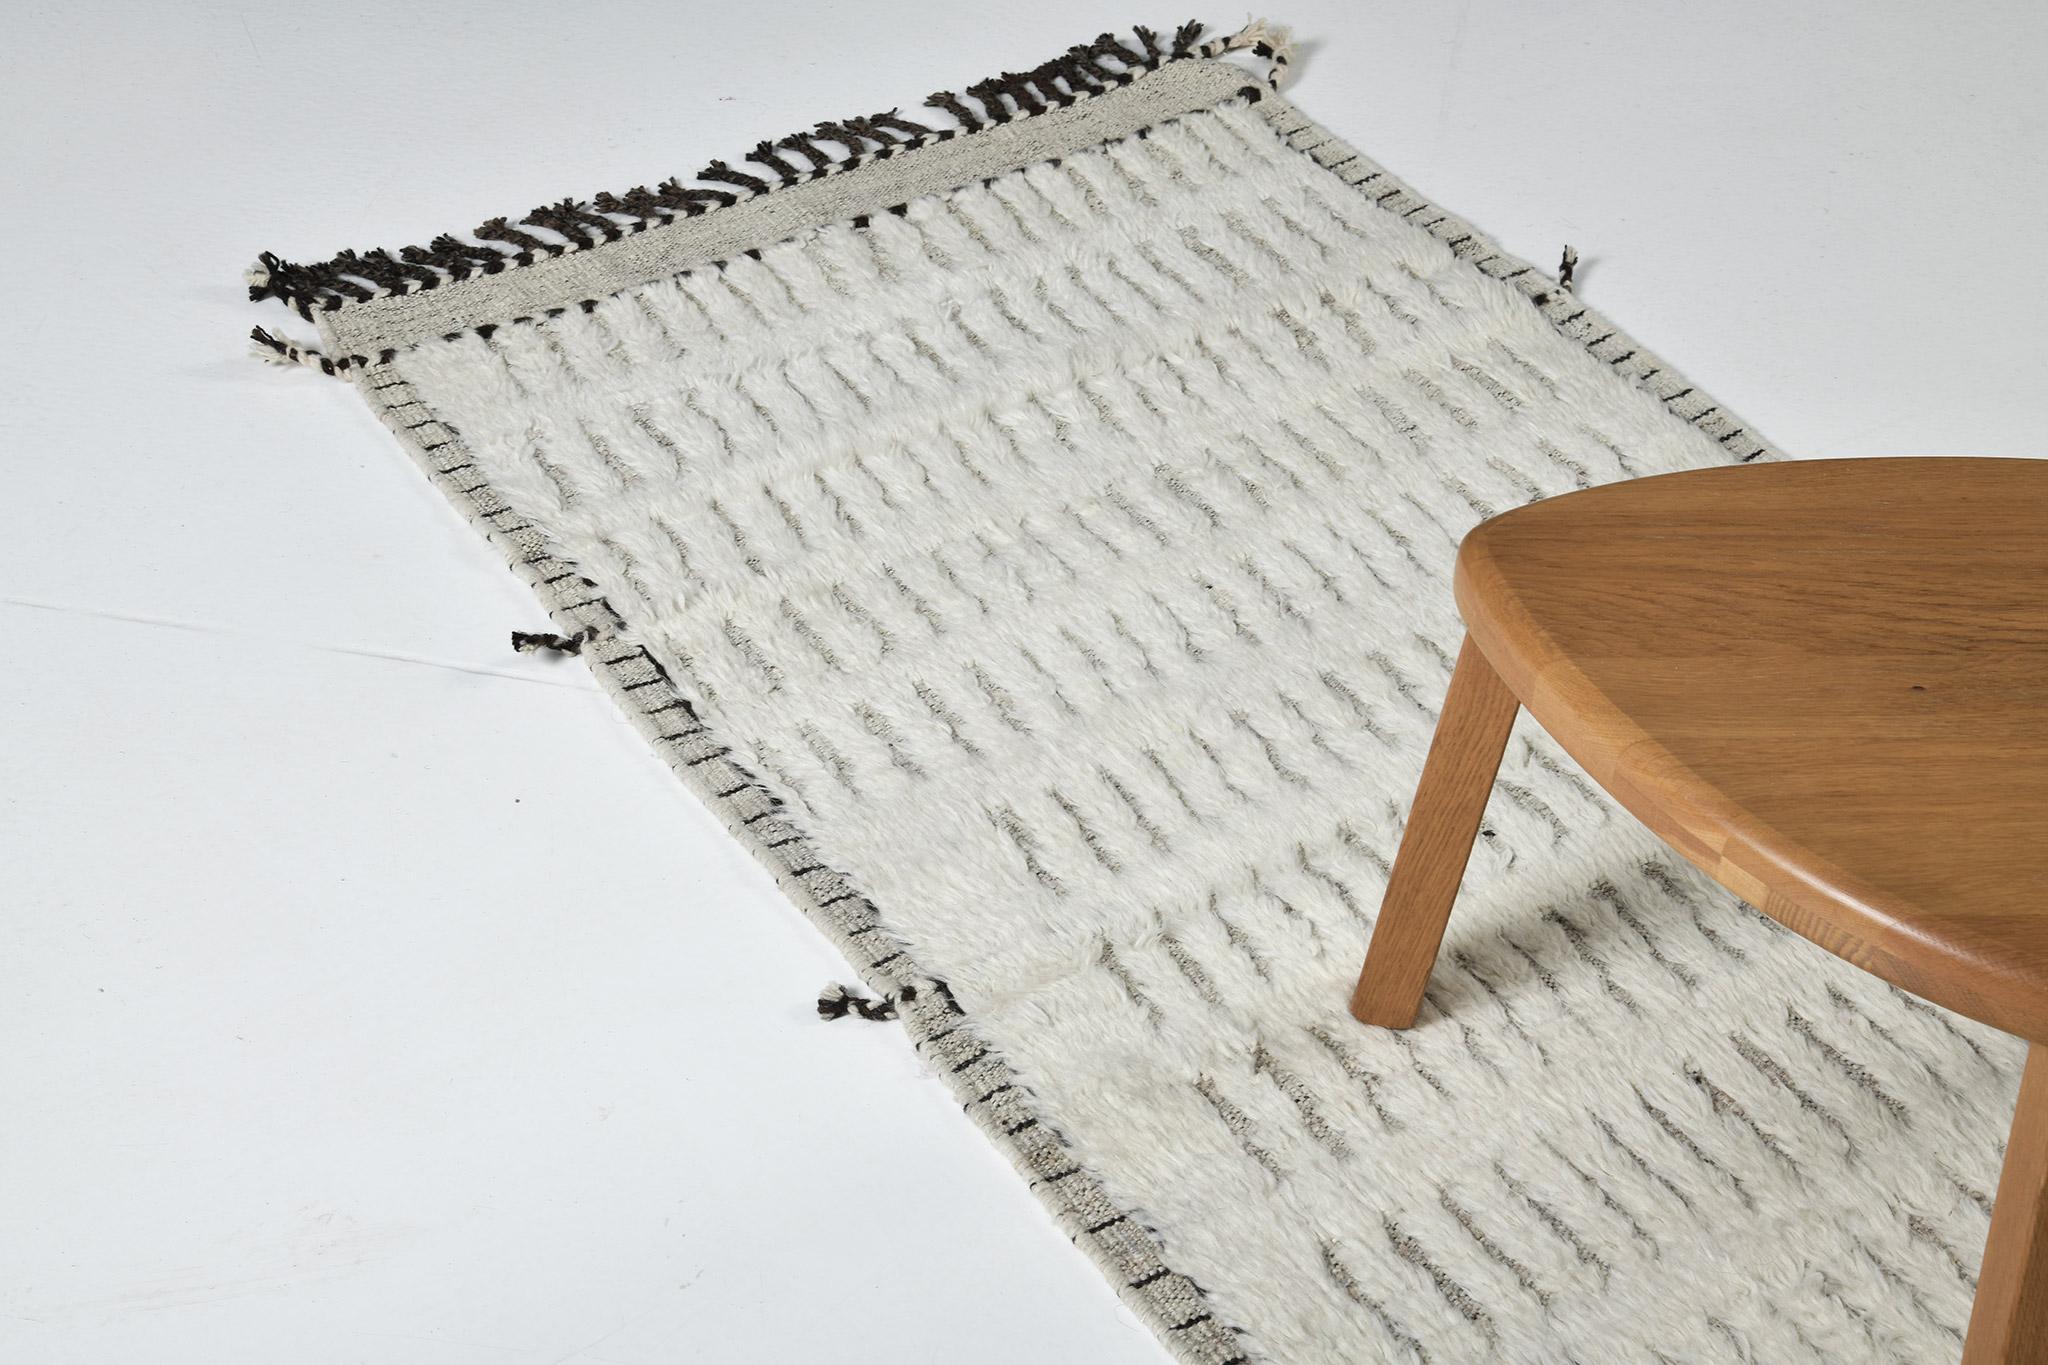 The signature Collection of California. Handwoven luxurious wool rug, made of timeless design elements and neutral earth tones with the perfect shade of ivory. Haute Bohemian Collection: designed in Los Angeles named for the winds knitting together